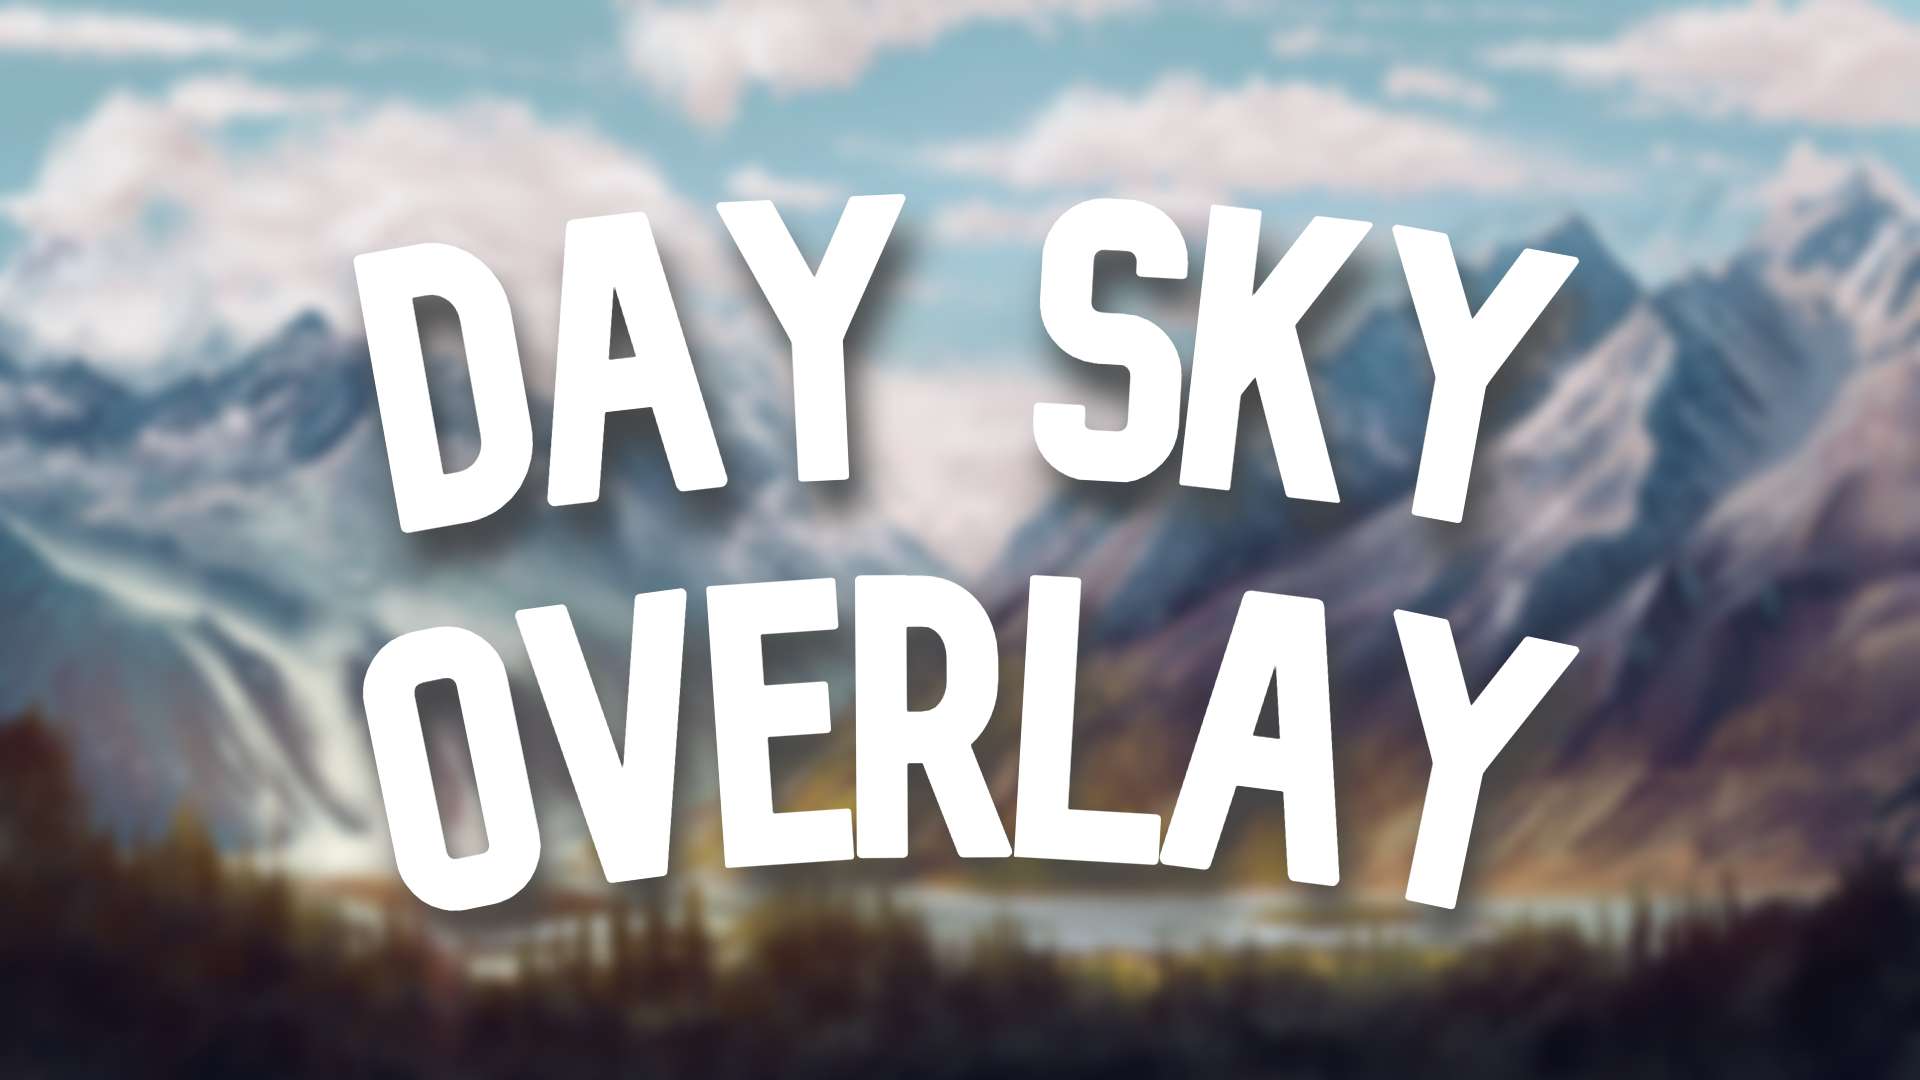 Day Sky Overlay #11 16x by rh56 on PvPRP